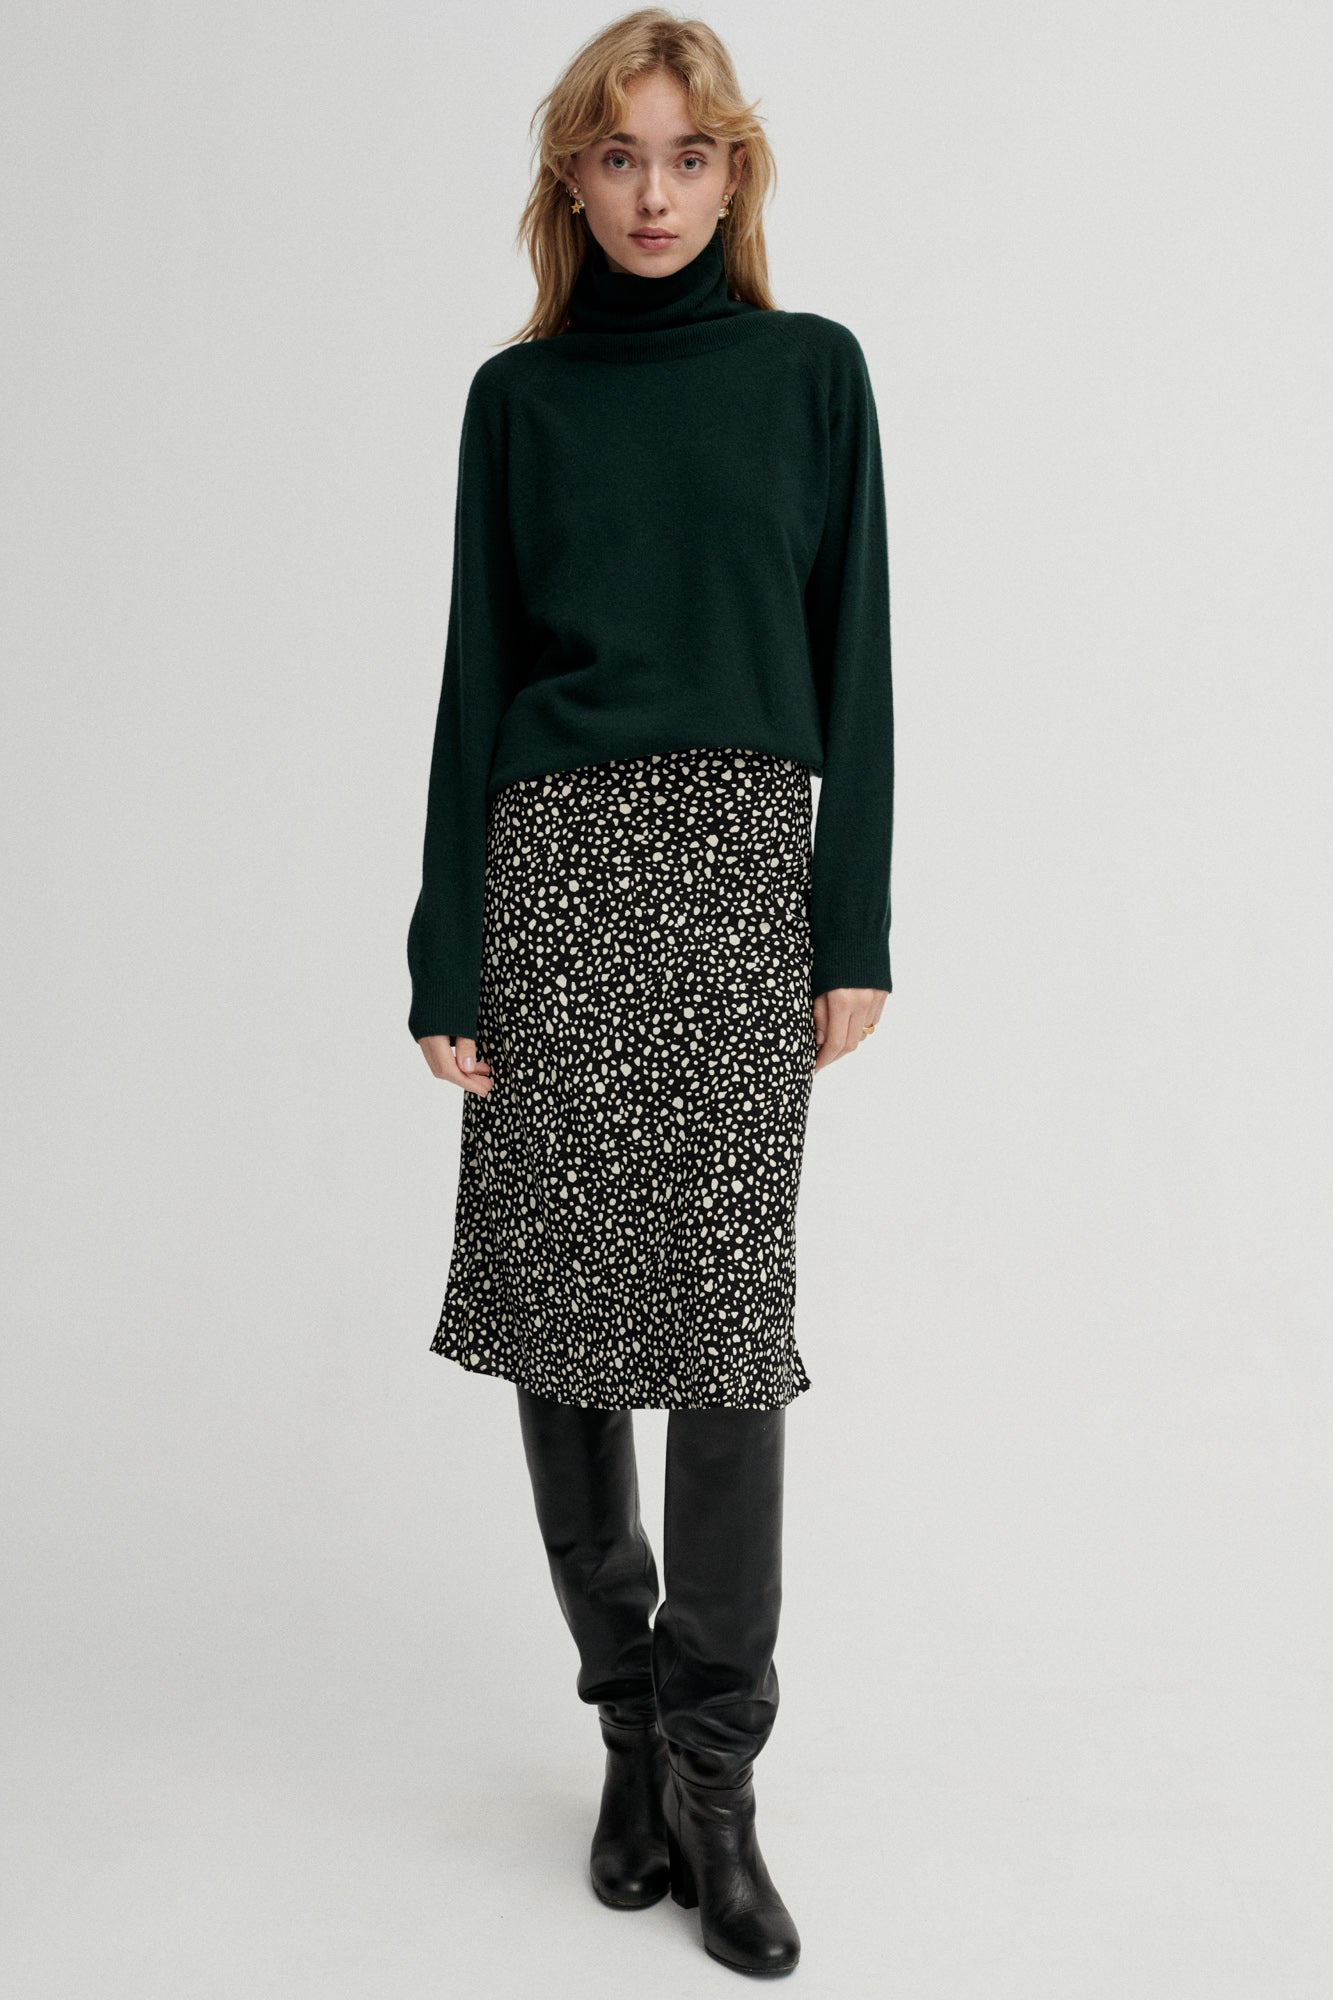 Sweater in cashmere / 16 / 13 / ivy green